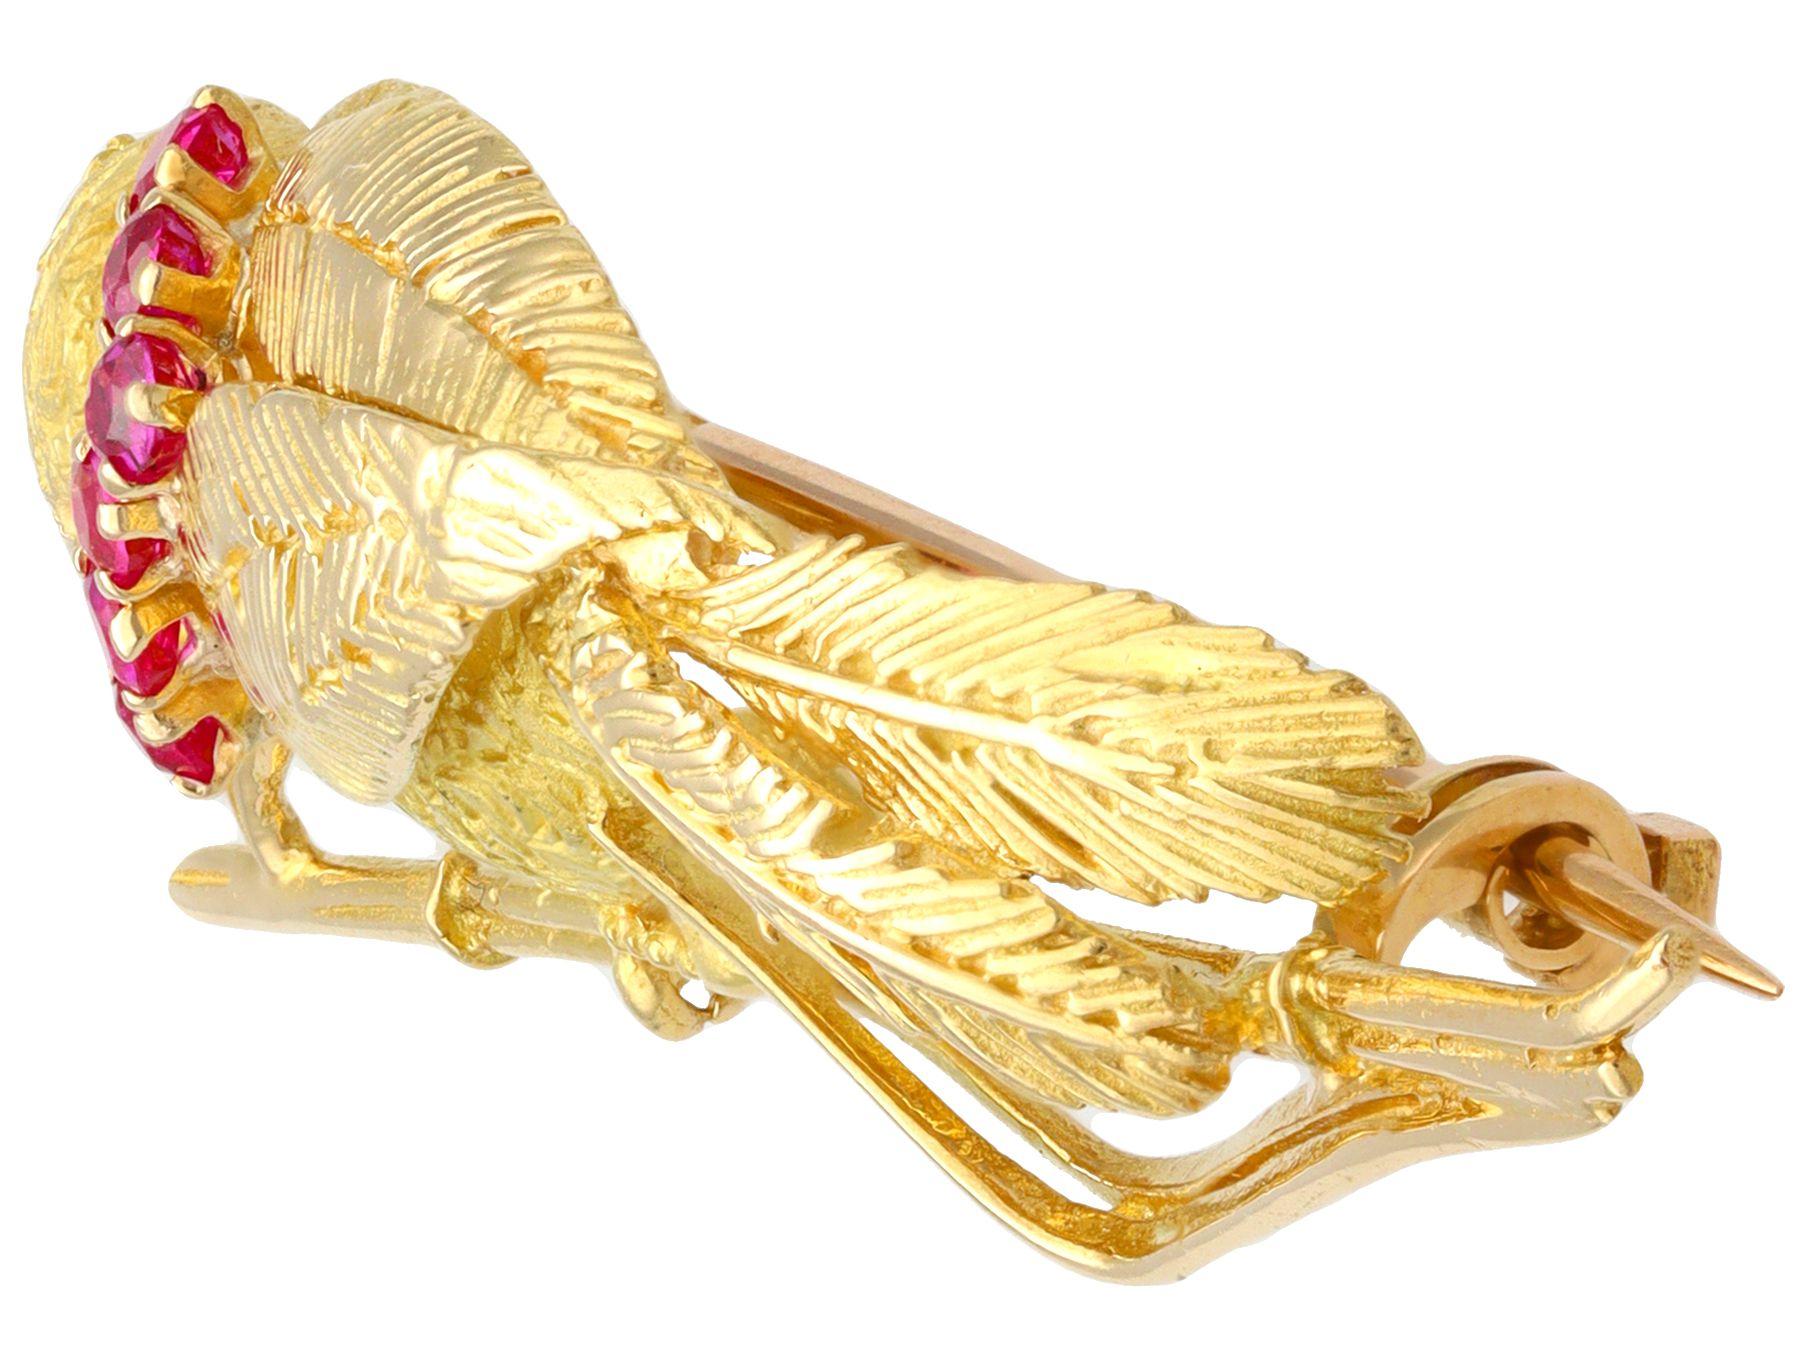 Vintage French Ruby and Emerald 18k Yellow Gold Bird Brooch In Excellent Condition For Sale In Jesmond, Newcastle Upon Tyne